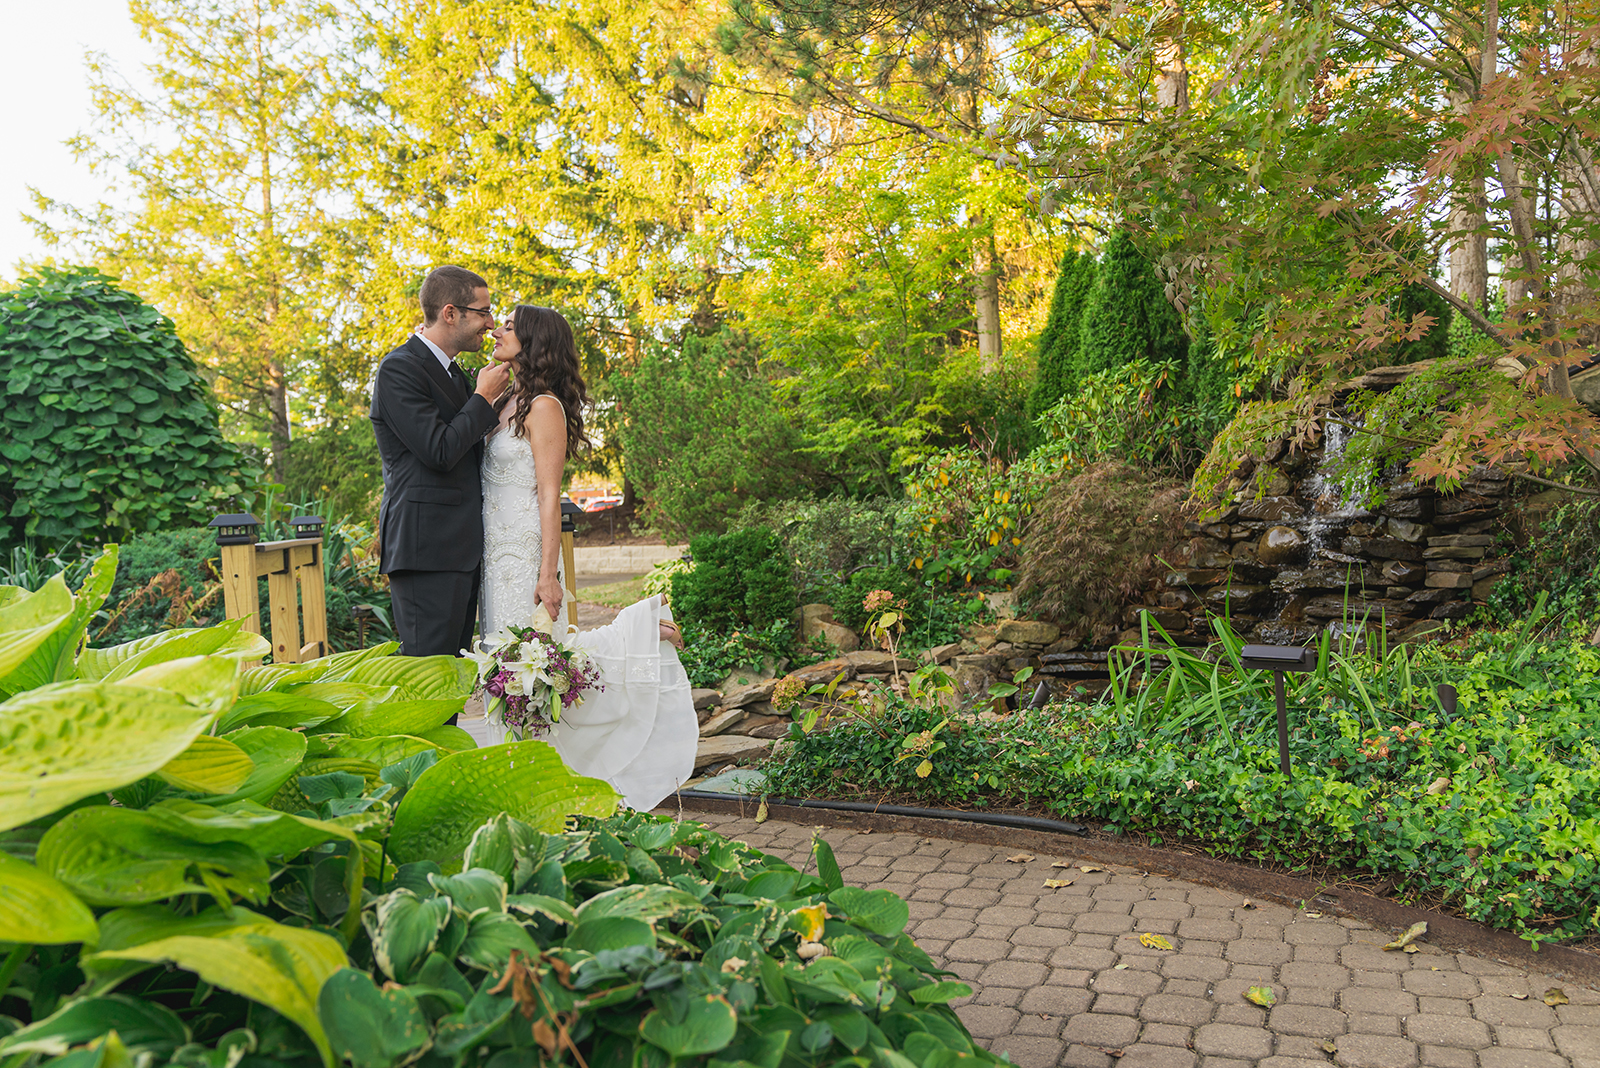 Bride and groom wedding portrait, couple portrait, cute pose, cute couple pose, cute bride and groom pose, green, nature, trees, stones, classy wedding ceremony at Landerhaven, Mayfield Heights OH